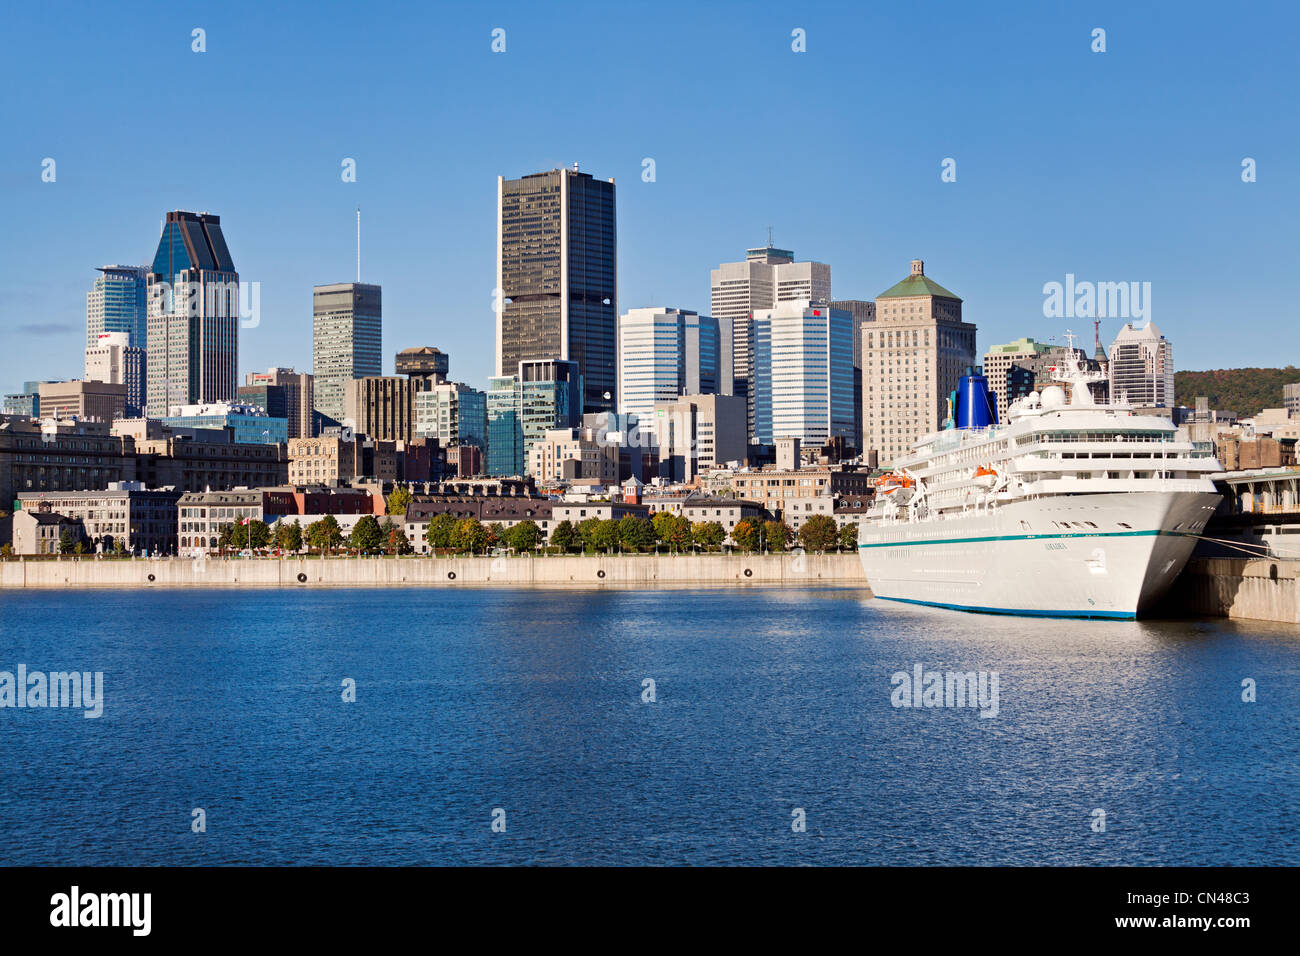 Canada, Quebec Province, Montreal, the port on the St. Lawrence River, the city and its skyscrapers, cruise ship ground handling Stock Photo